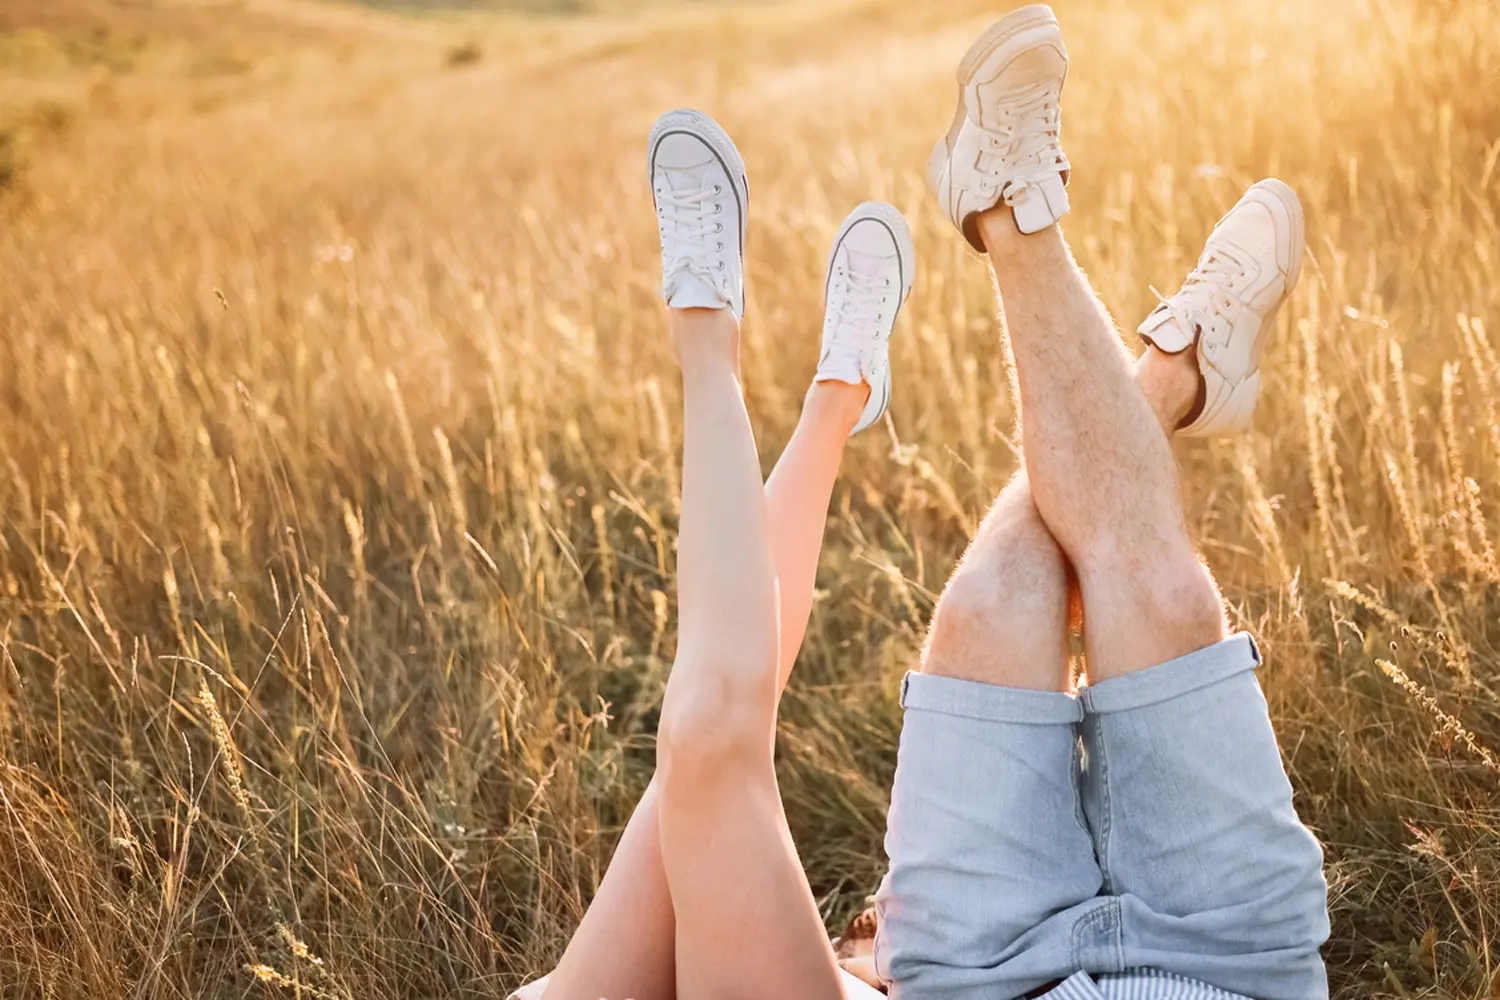 A man and woman sitting in a field with their legs up.